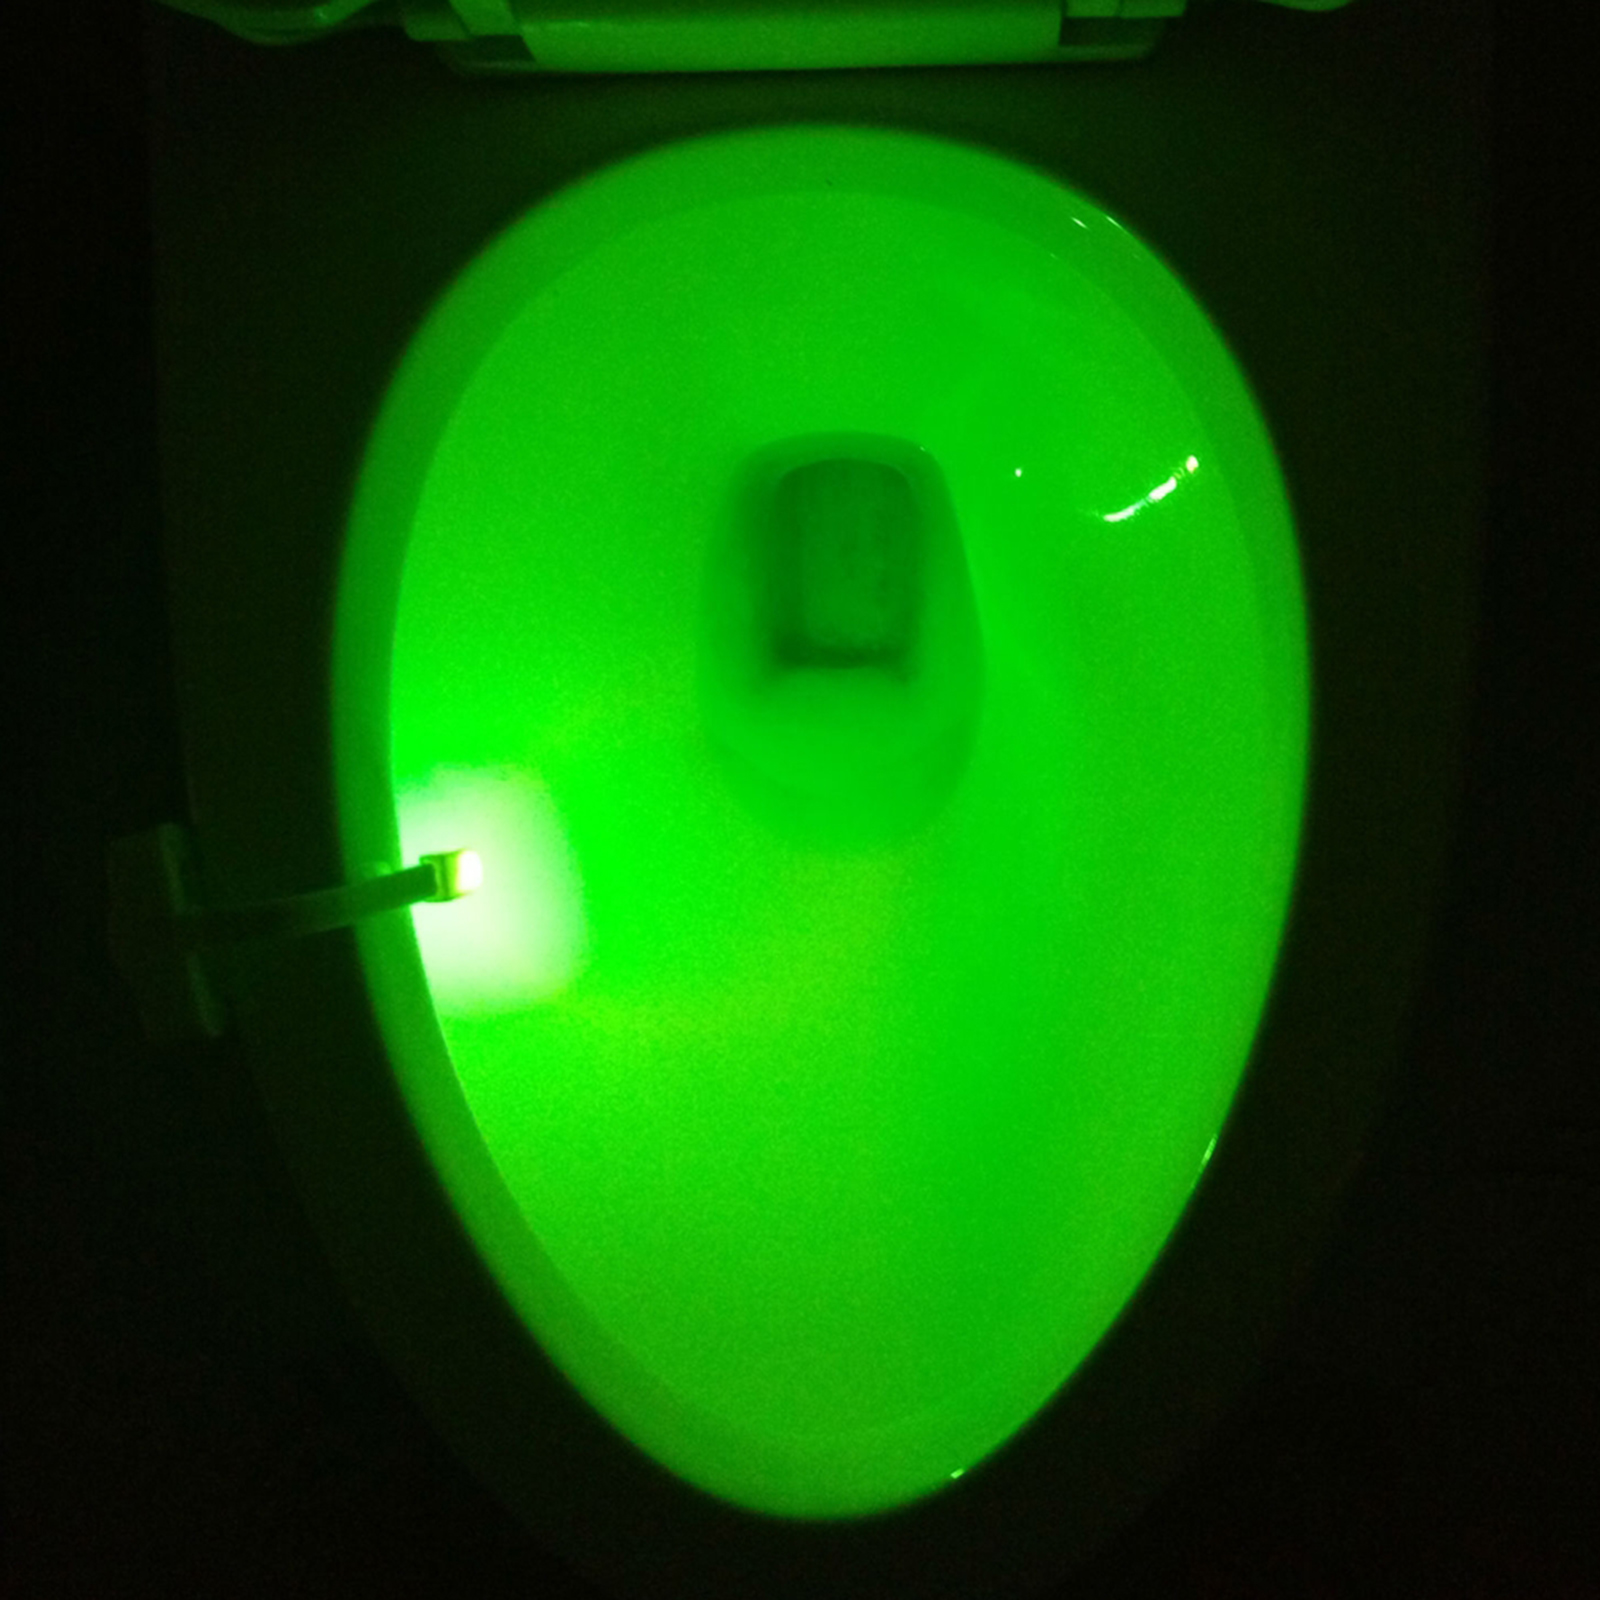 LUOMs 2 Pcs Toilet LED Night Light, TL01 Human Bodies Induced